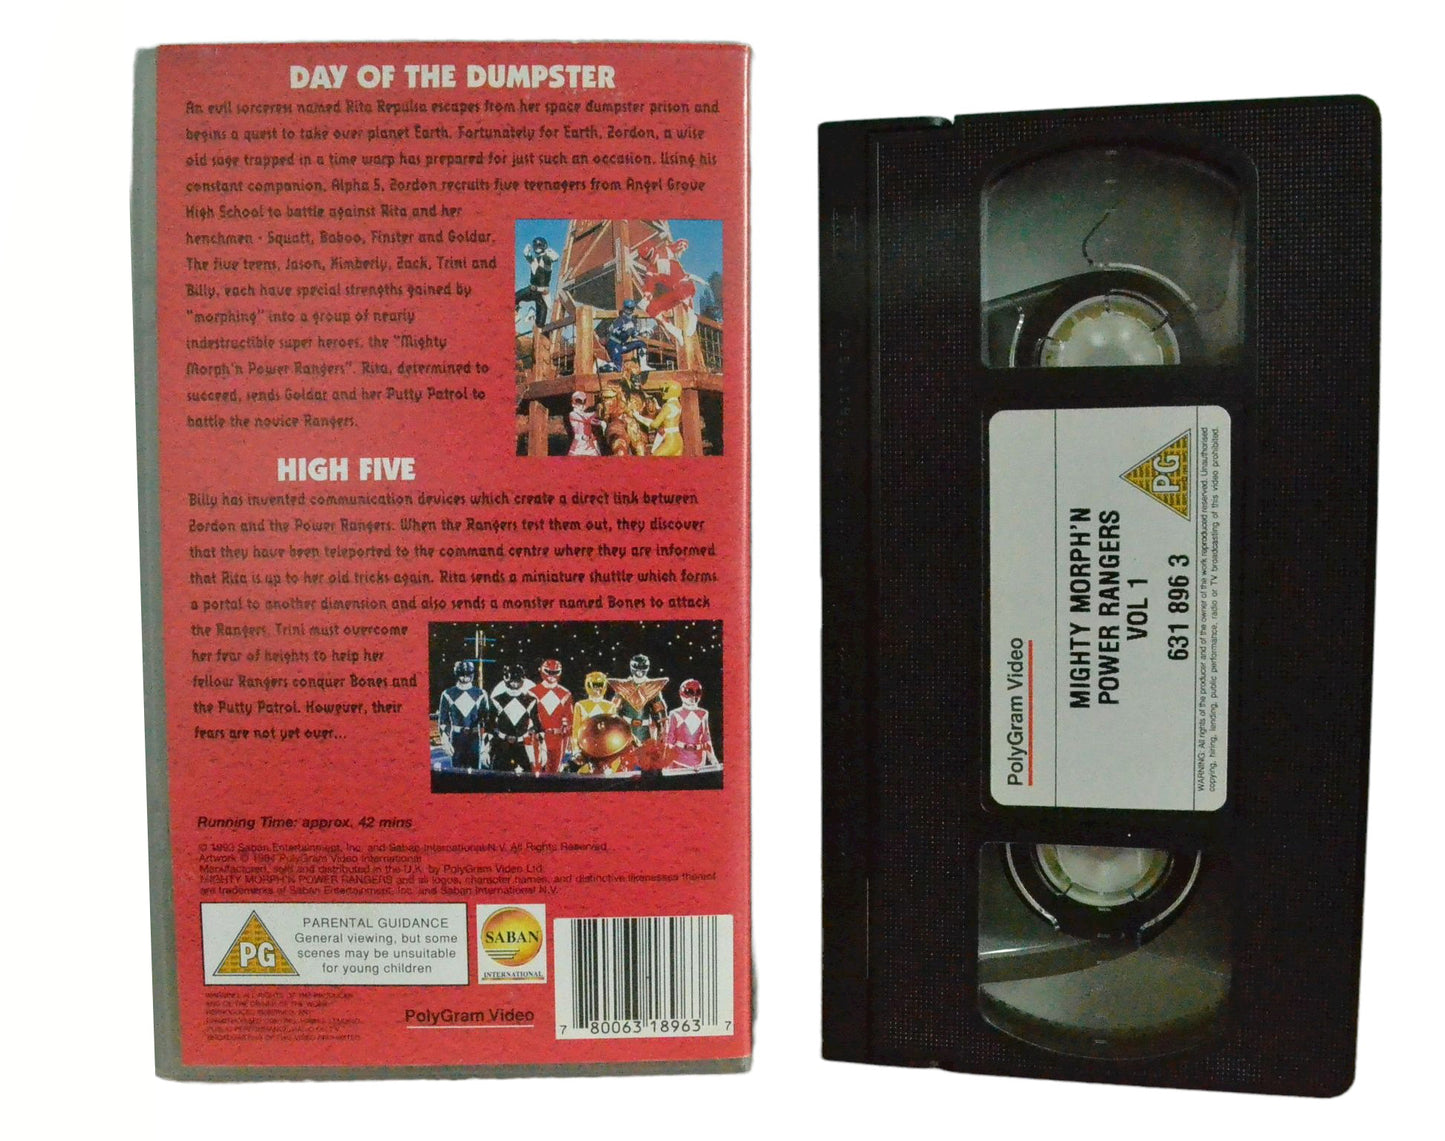 Mighty Morph 'N Power Rangers - Day of the Dumpster & High Five - Polygram Video - Childrens - Pal VHS-